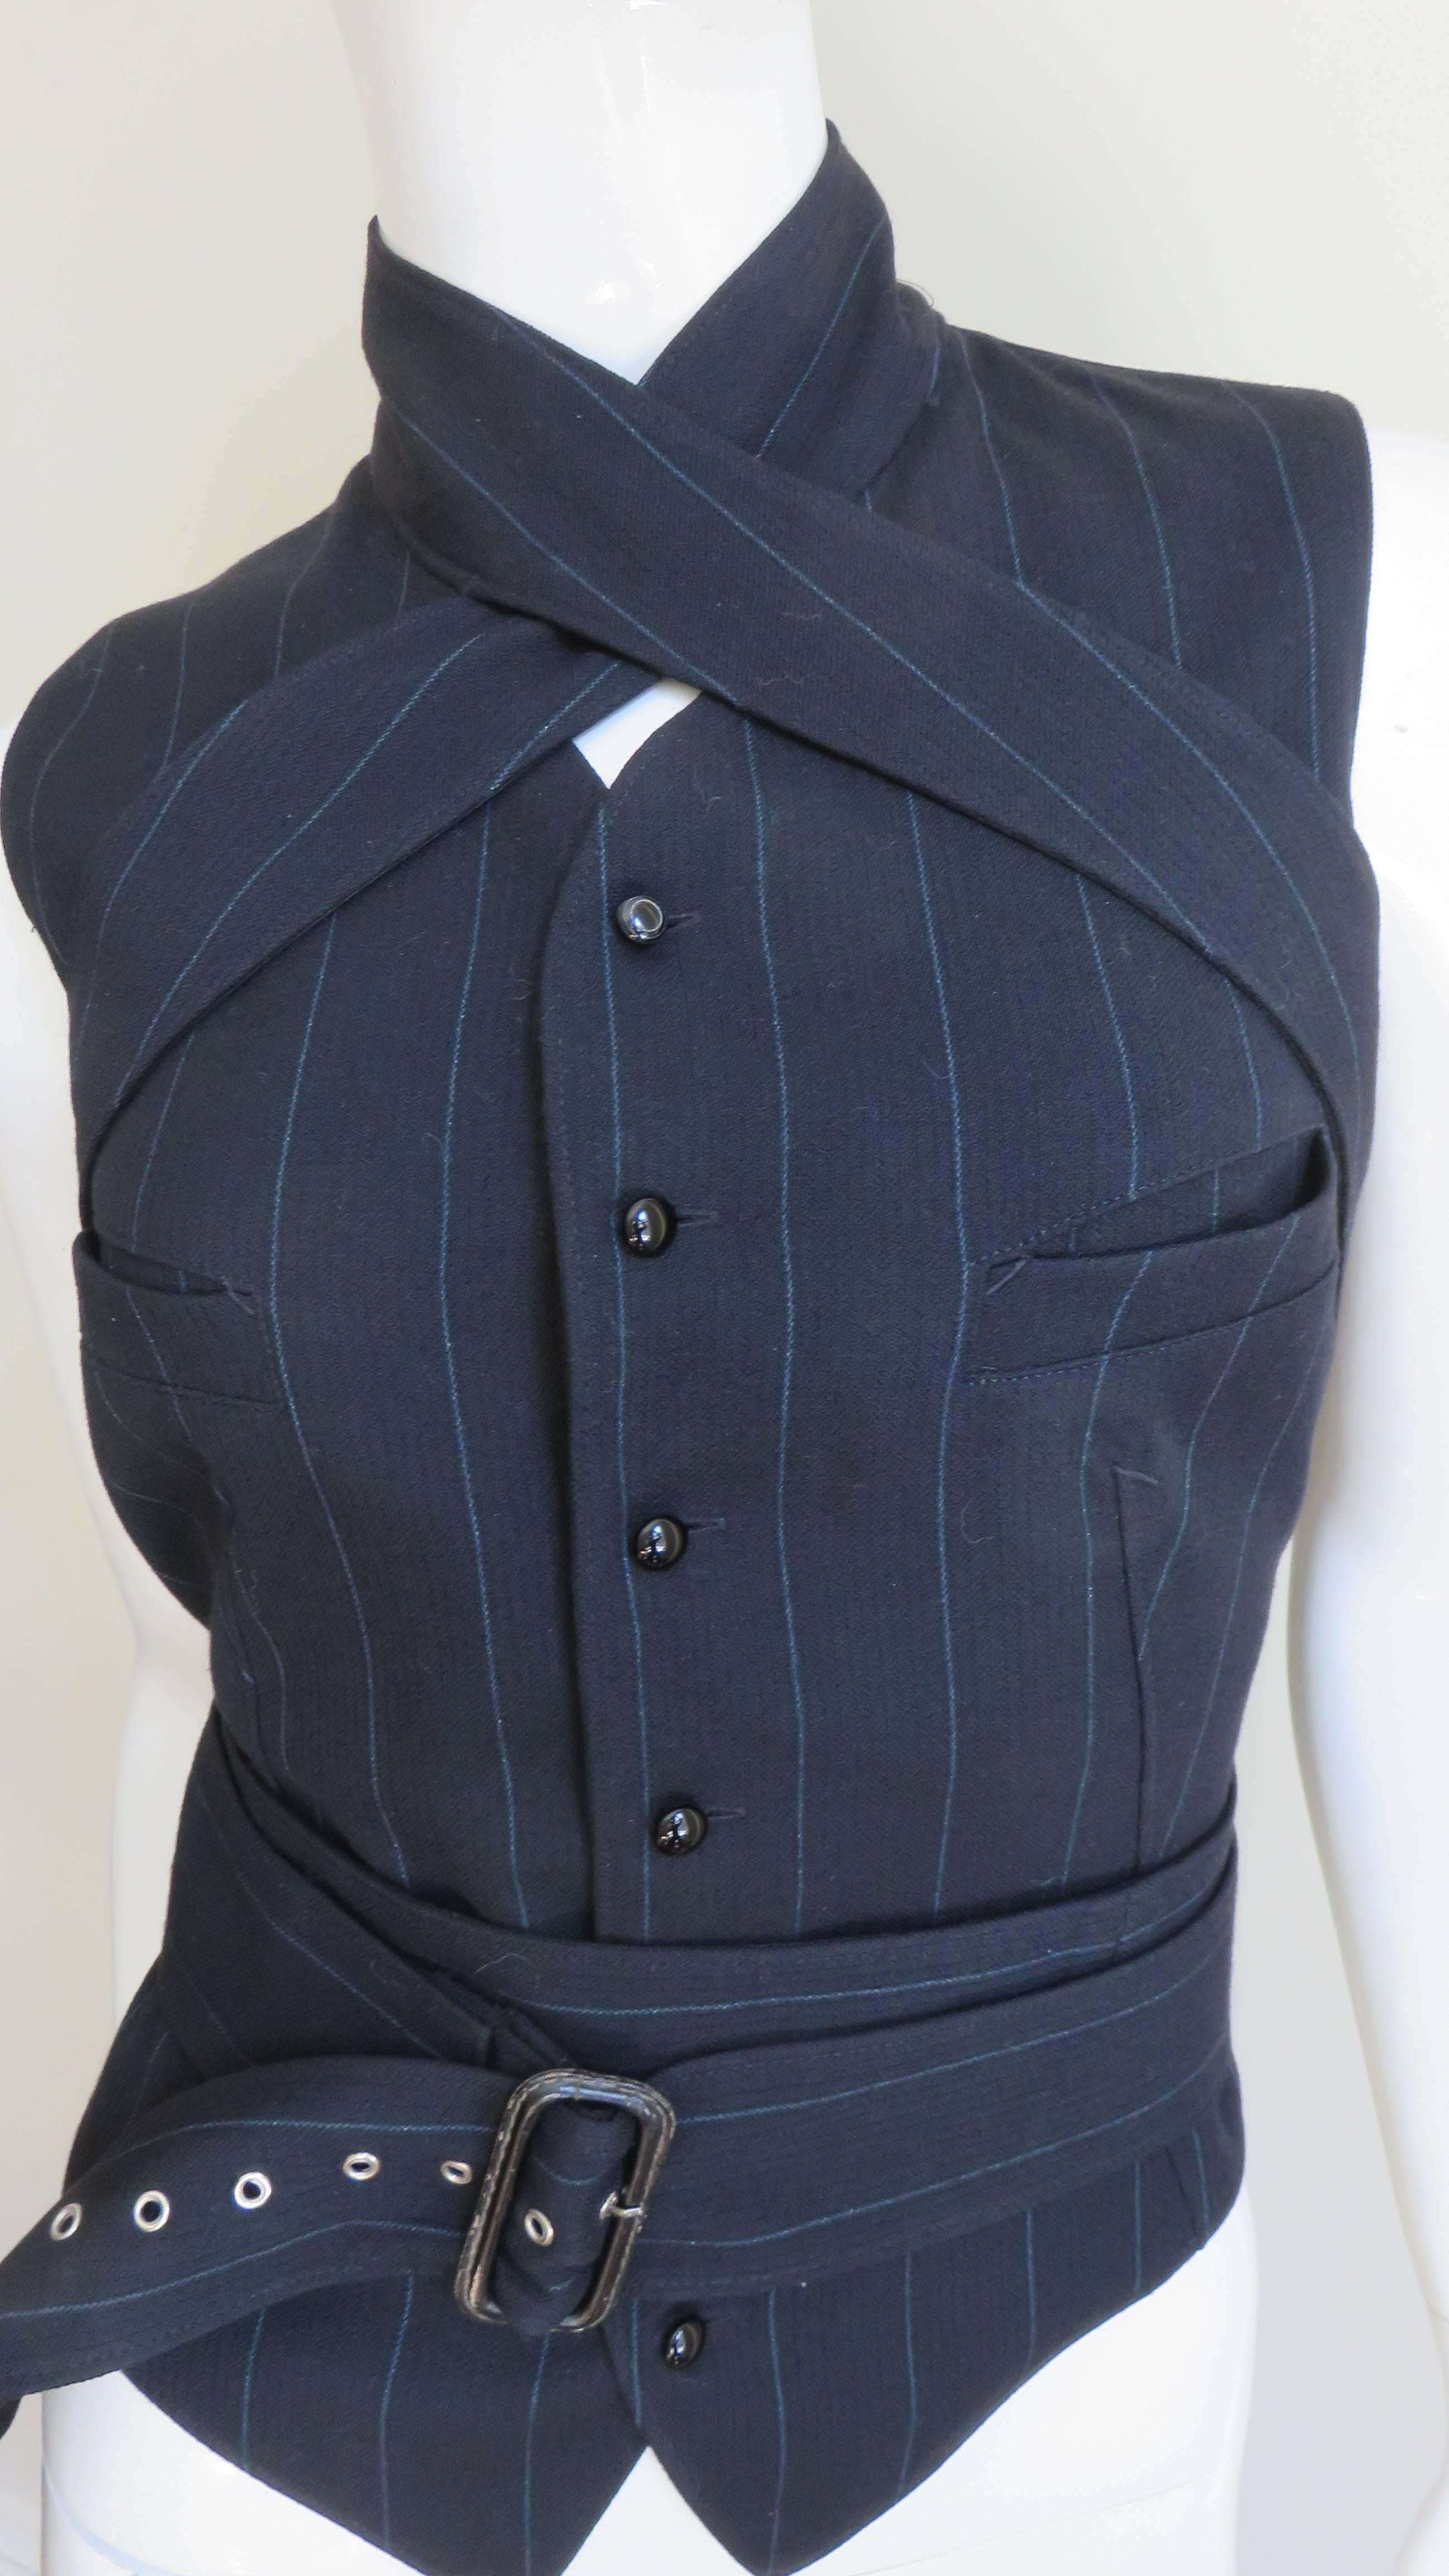 This is an incredible black with blue stripes wool vest by Jean Paul Gaultier.  It has a stand up collar from which extends to long straps with rings that wrap below the shoulders across the back and wrap once or twice around the waist closing with